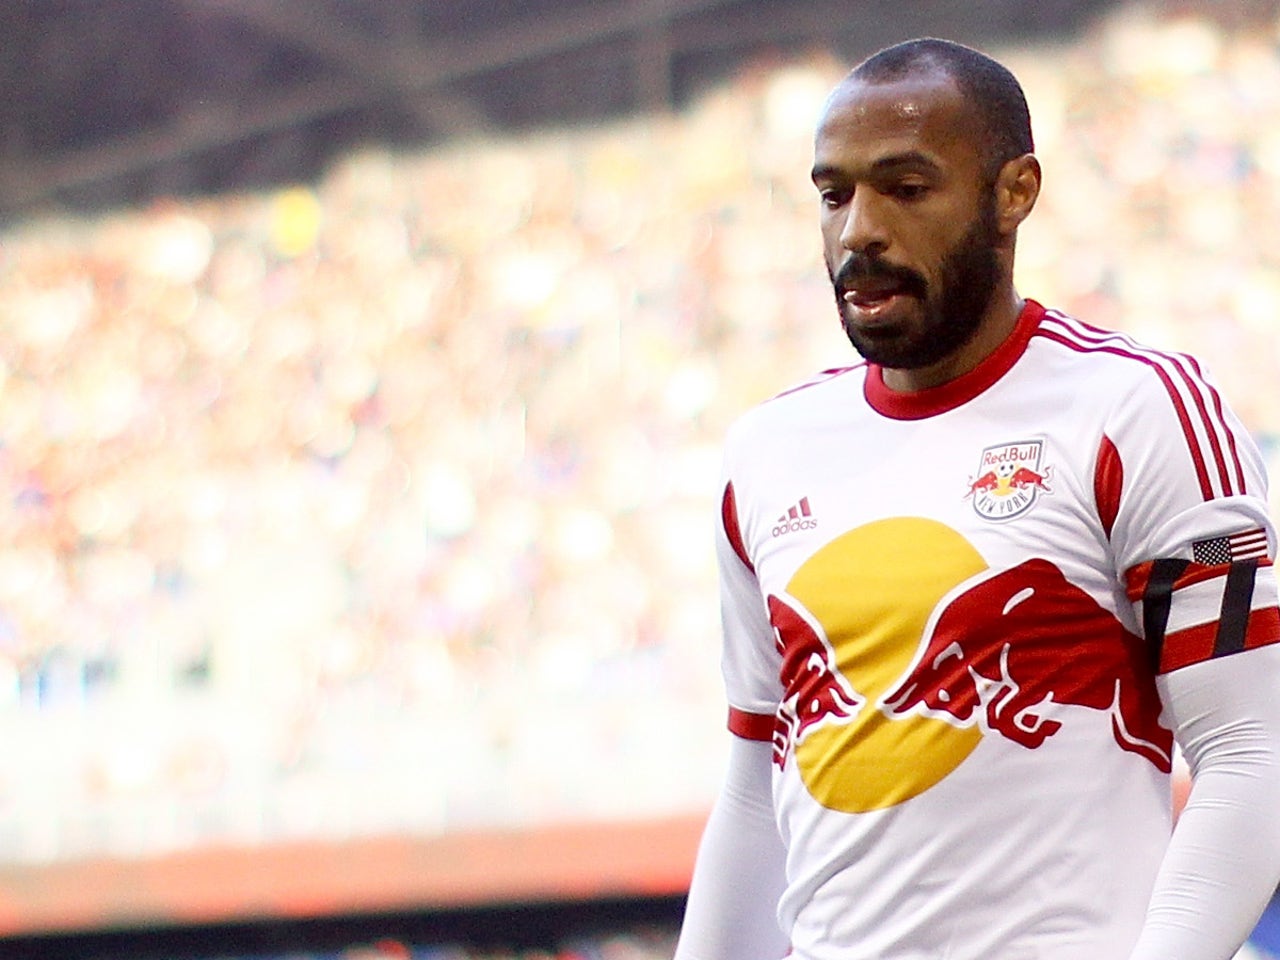 Thierry Henry 'Time Travels' Through Classic Soccer Moments in Sky